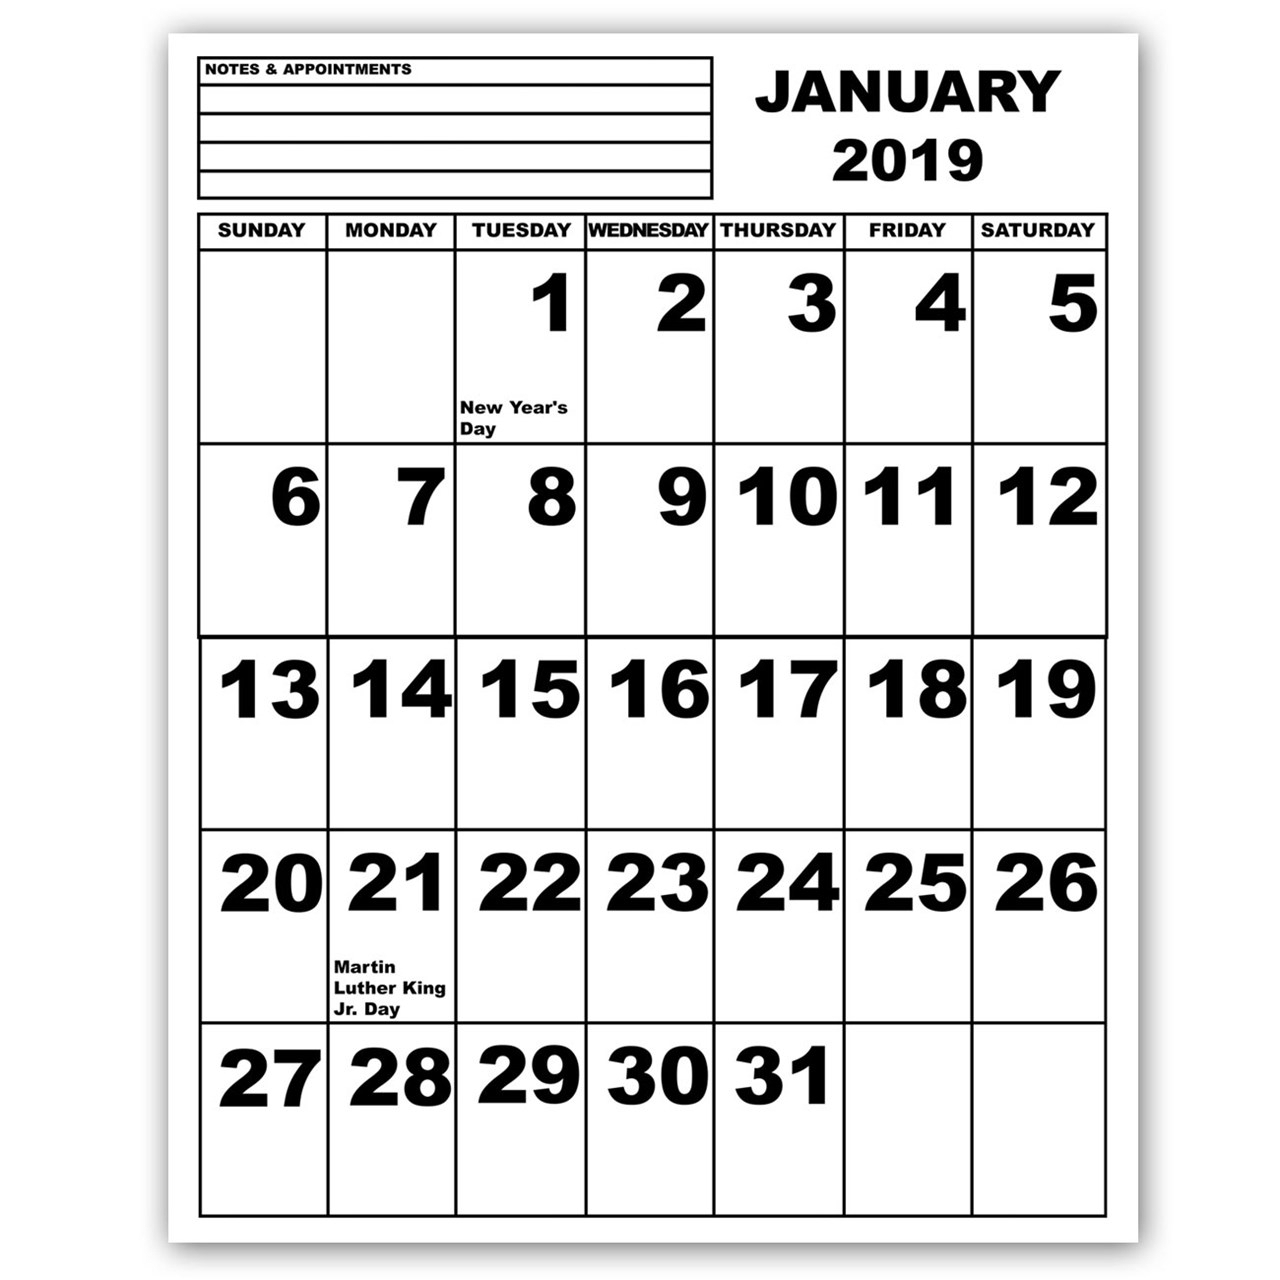 Free Calendar Templates For The Blind  Calendar Inspiration in Free Printable Large Print Calendars For The Visually Impaired